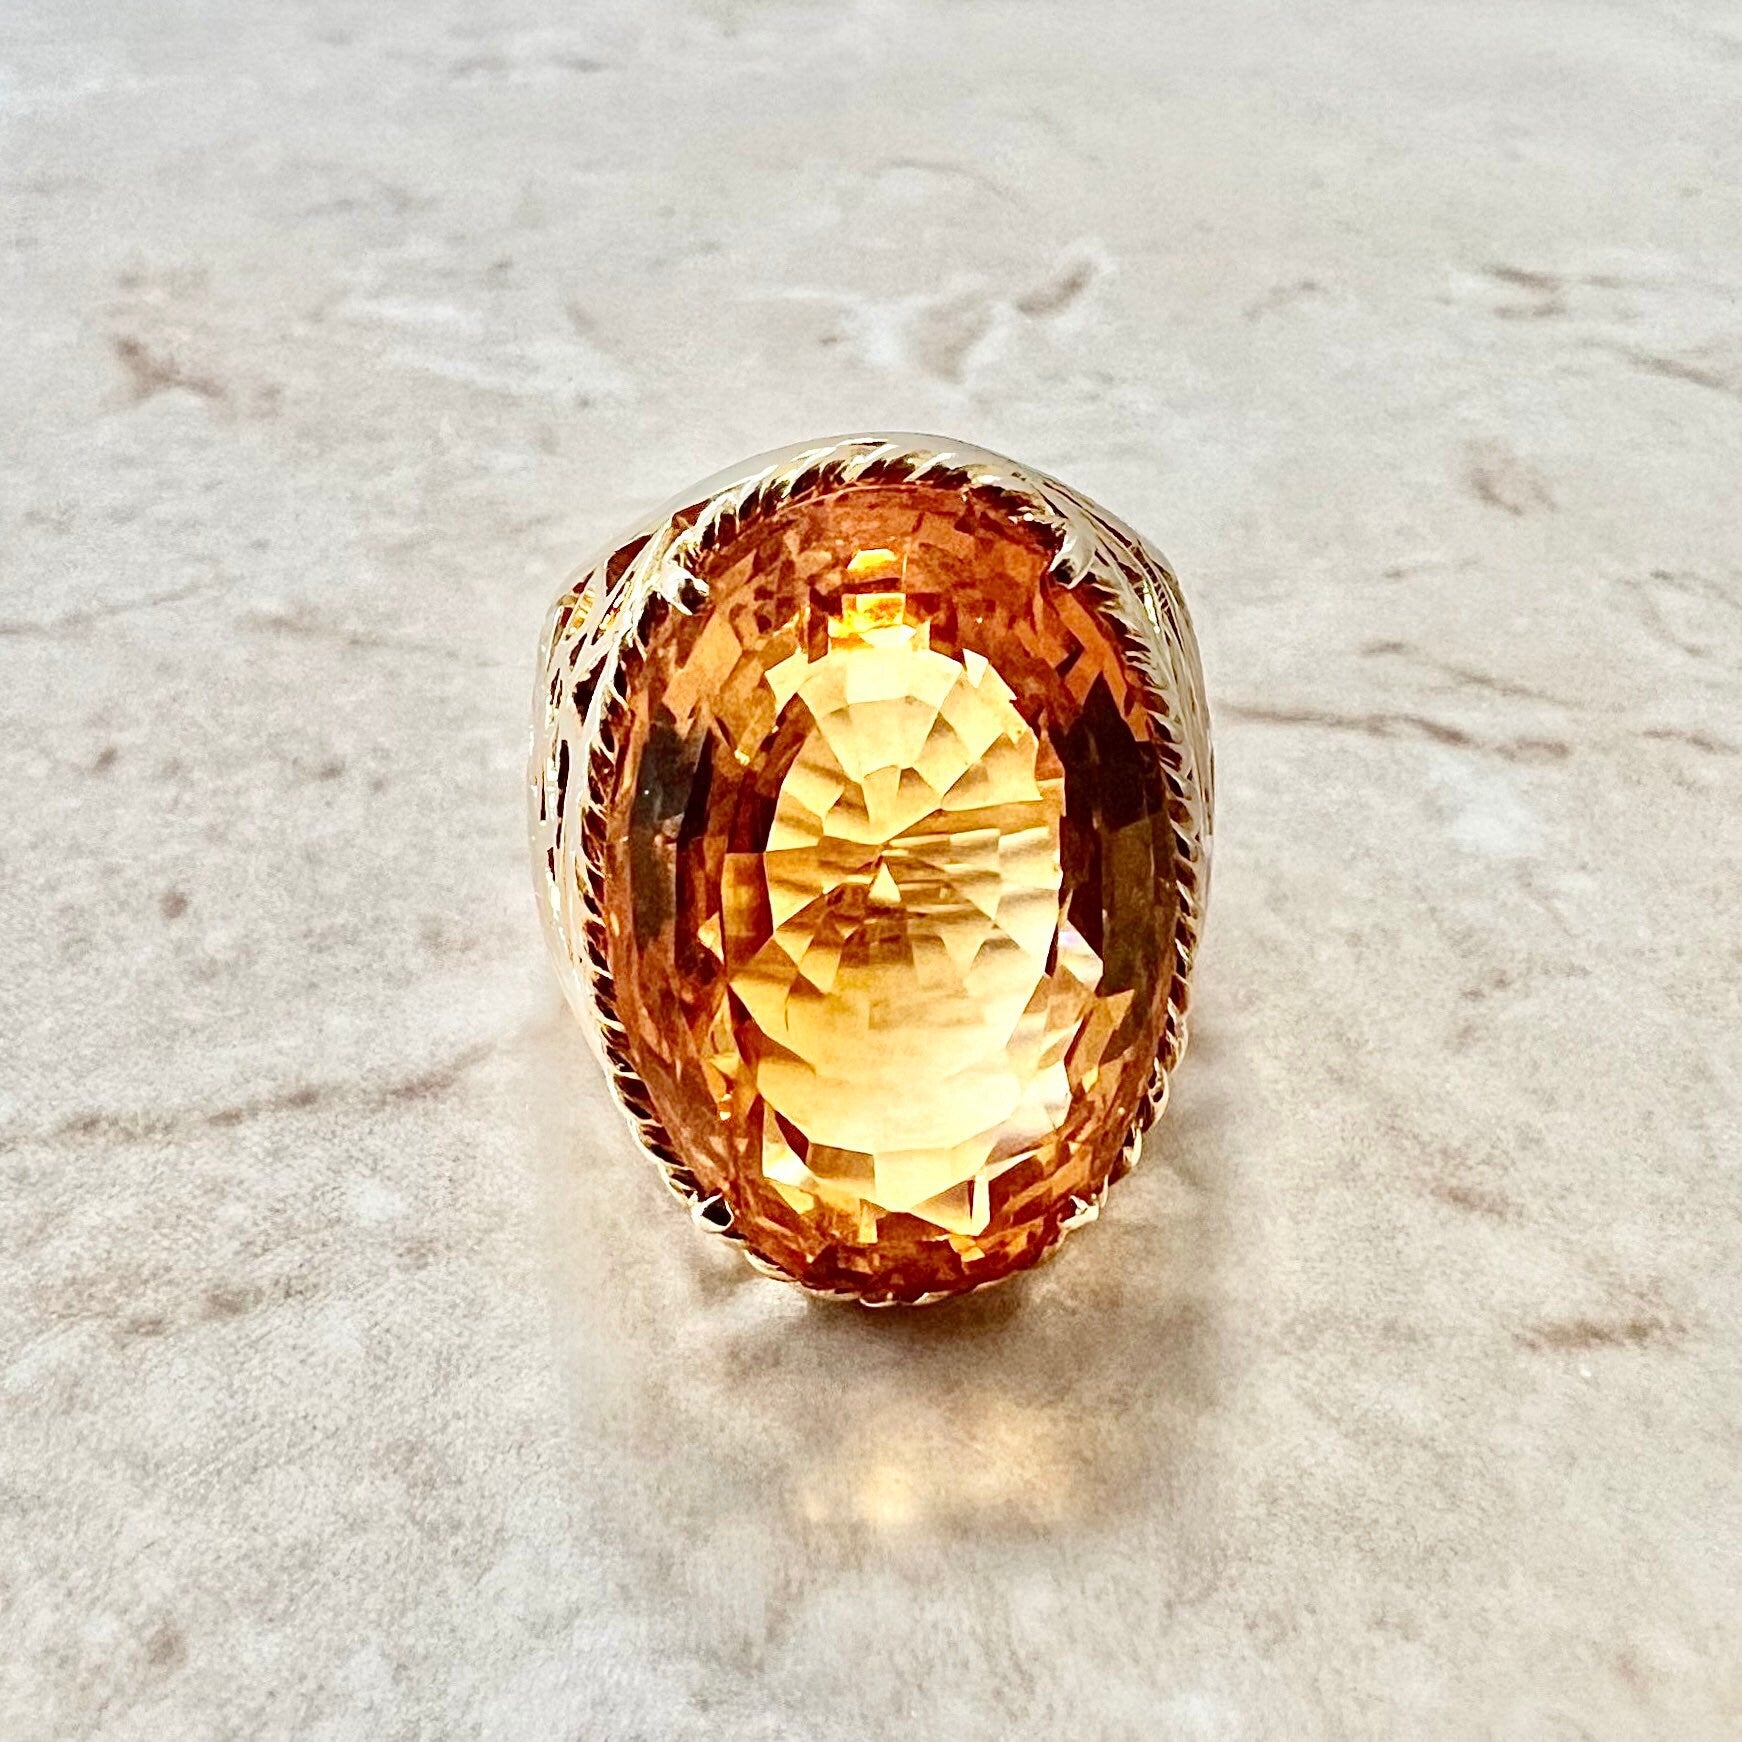 Vintage 14K Citrine Cocktail Ring In Yellow Gold - Chunky Yellow Gold Citrine Ring - Citrine Solitaire Ring-Birthday Gift-Best Gifts For Her